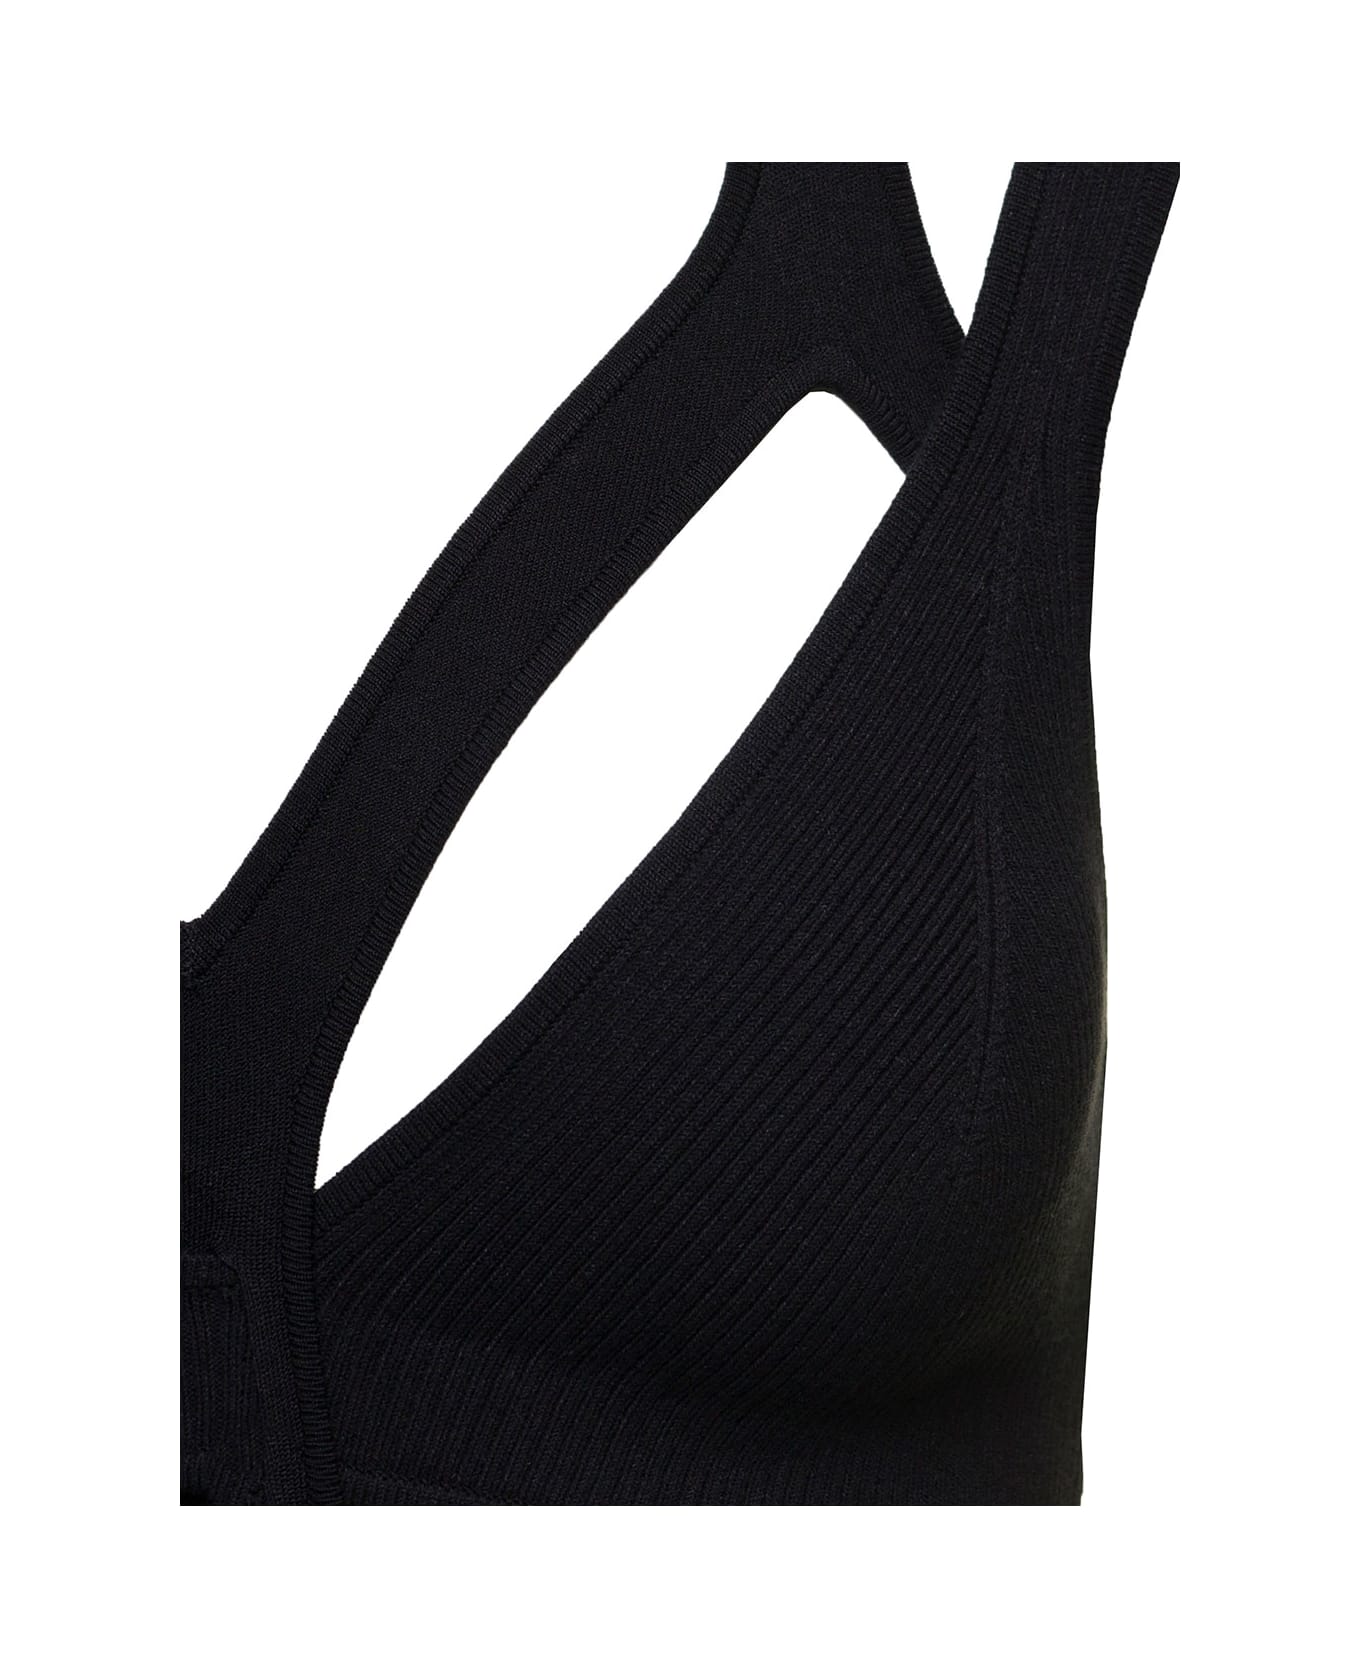 Dion Lee 'interlink' Midi Black Dress With Cut-out Detail In Viscose Blend Woman - Black